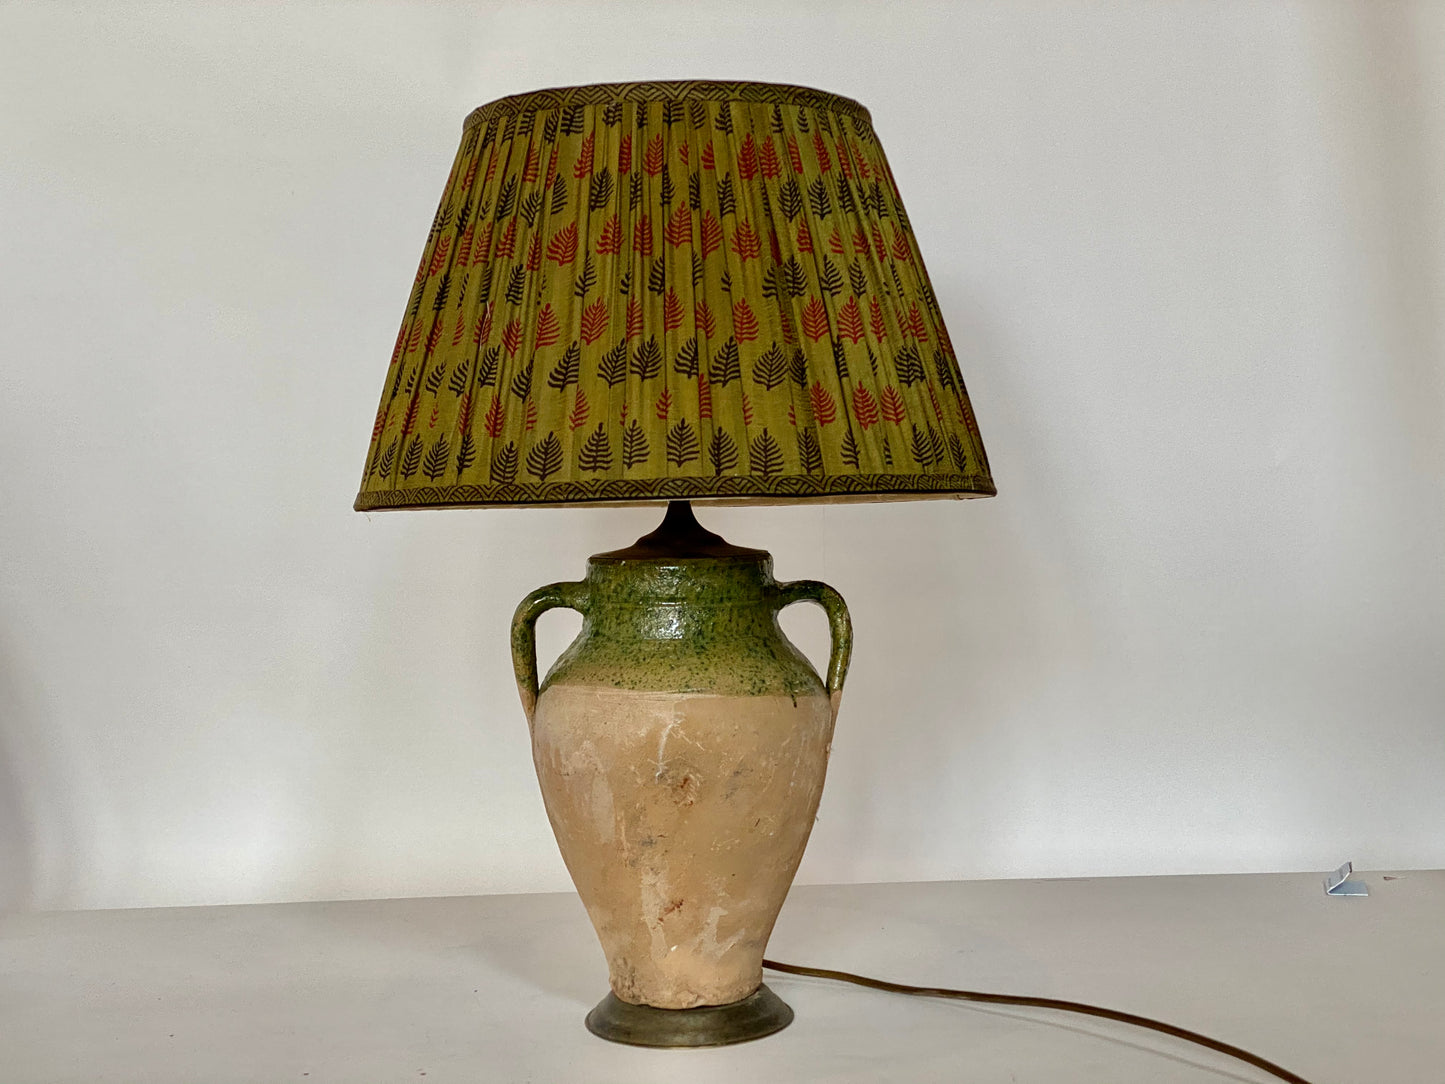 Olive green and red silk lampshade